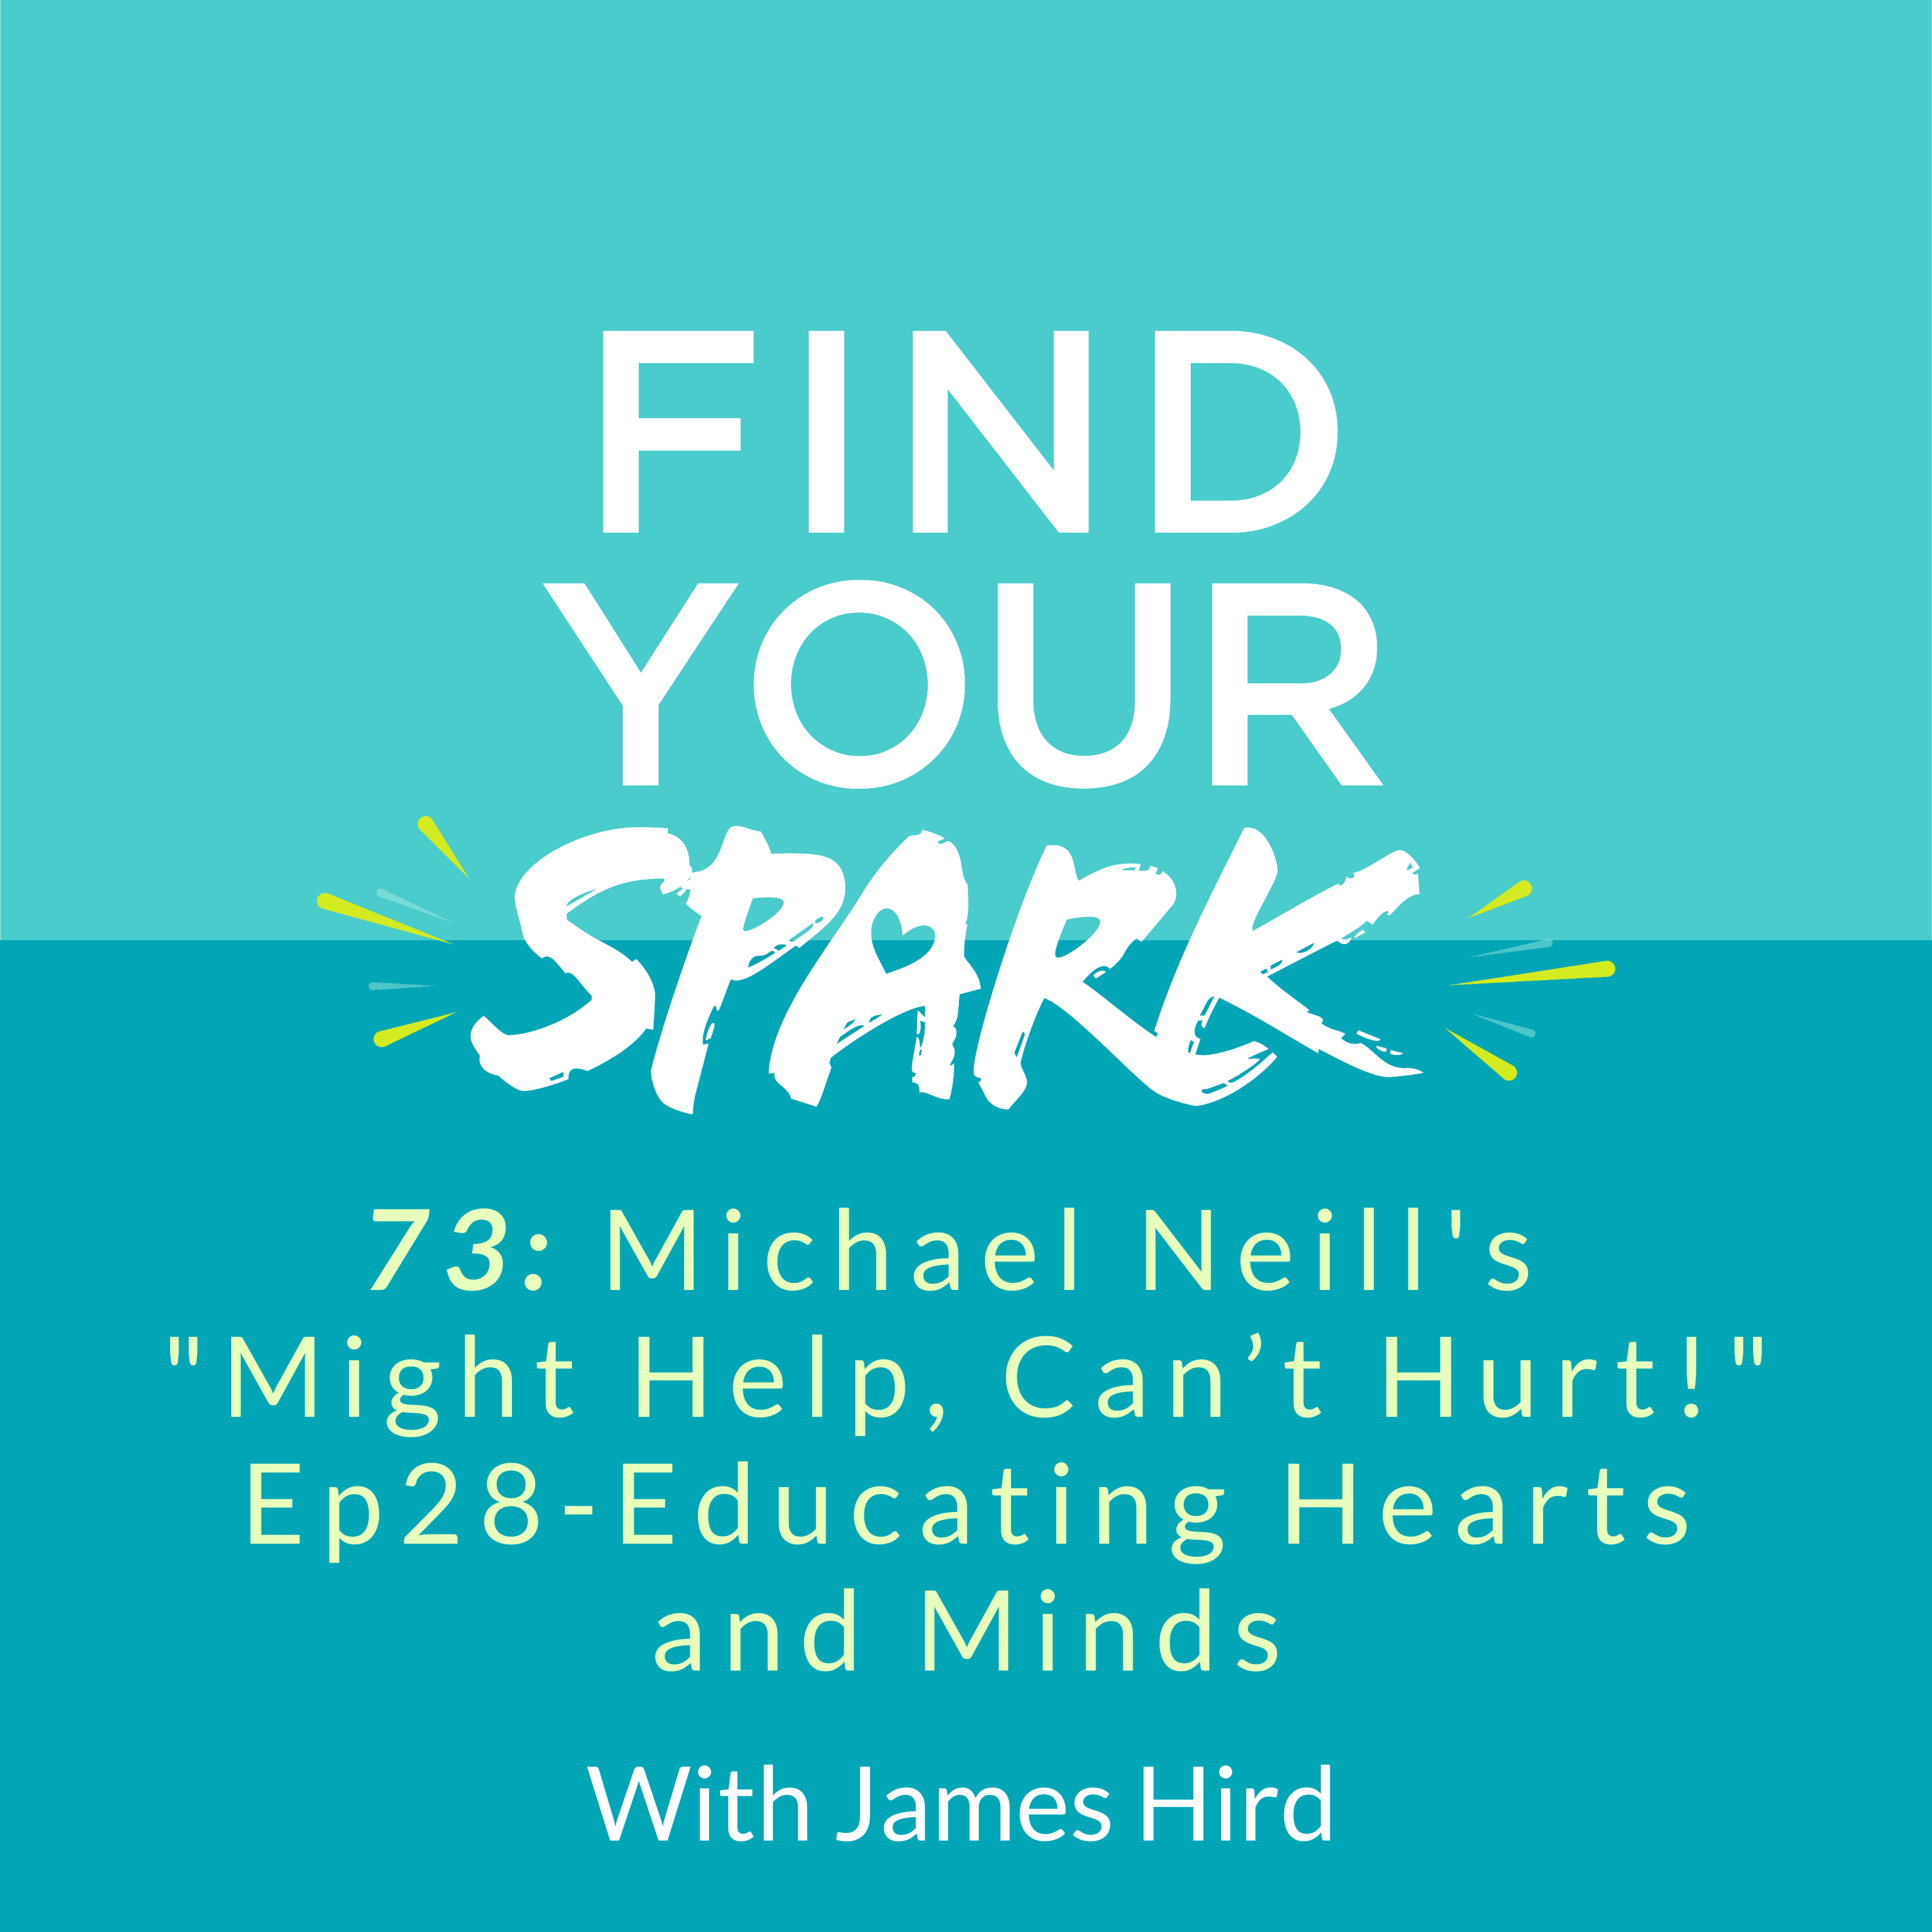 73: Michael Neill's "Might Help, Can’t Hurt!" Ep28 - Educating Hearts and Minds